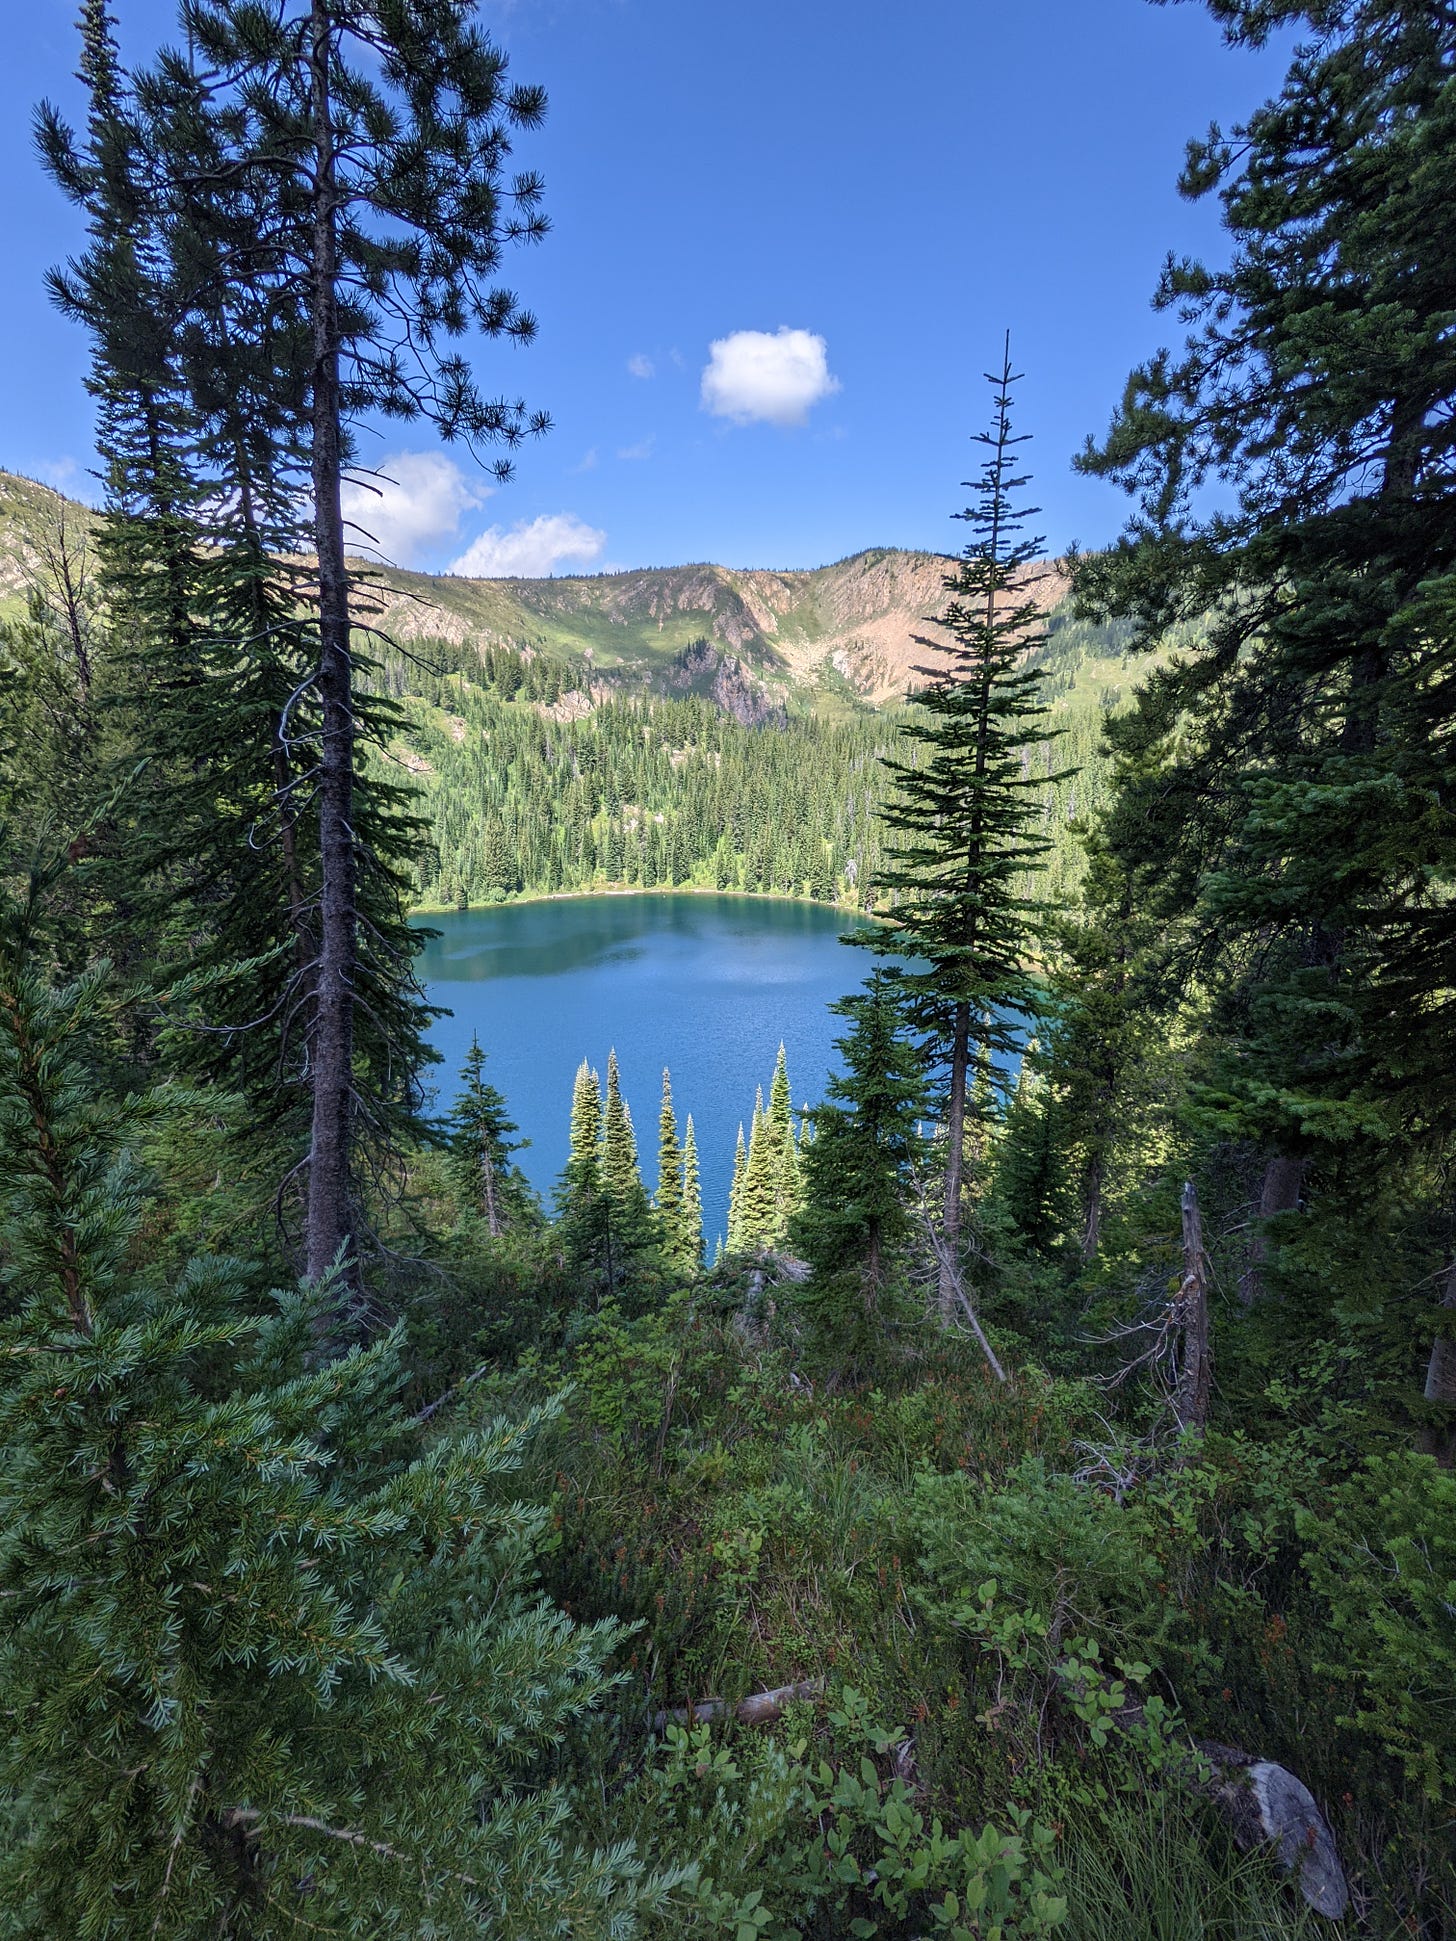 Alpine lake nestled in coniferous trees surrounded by mountains